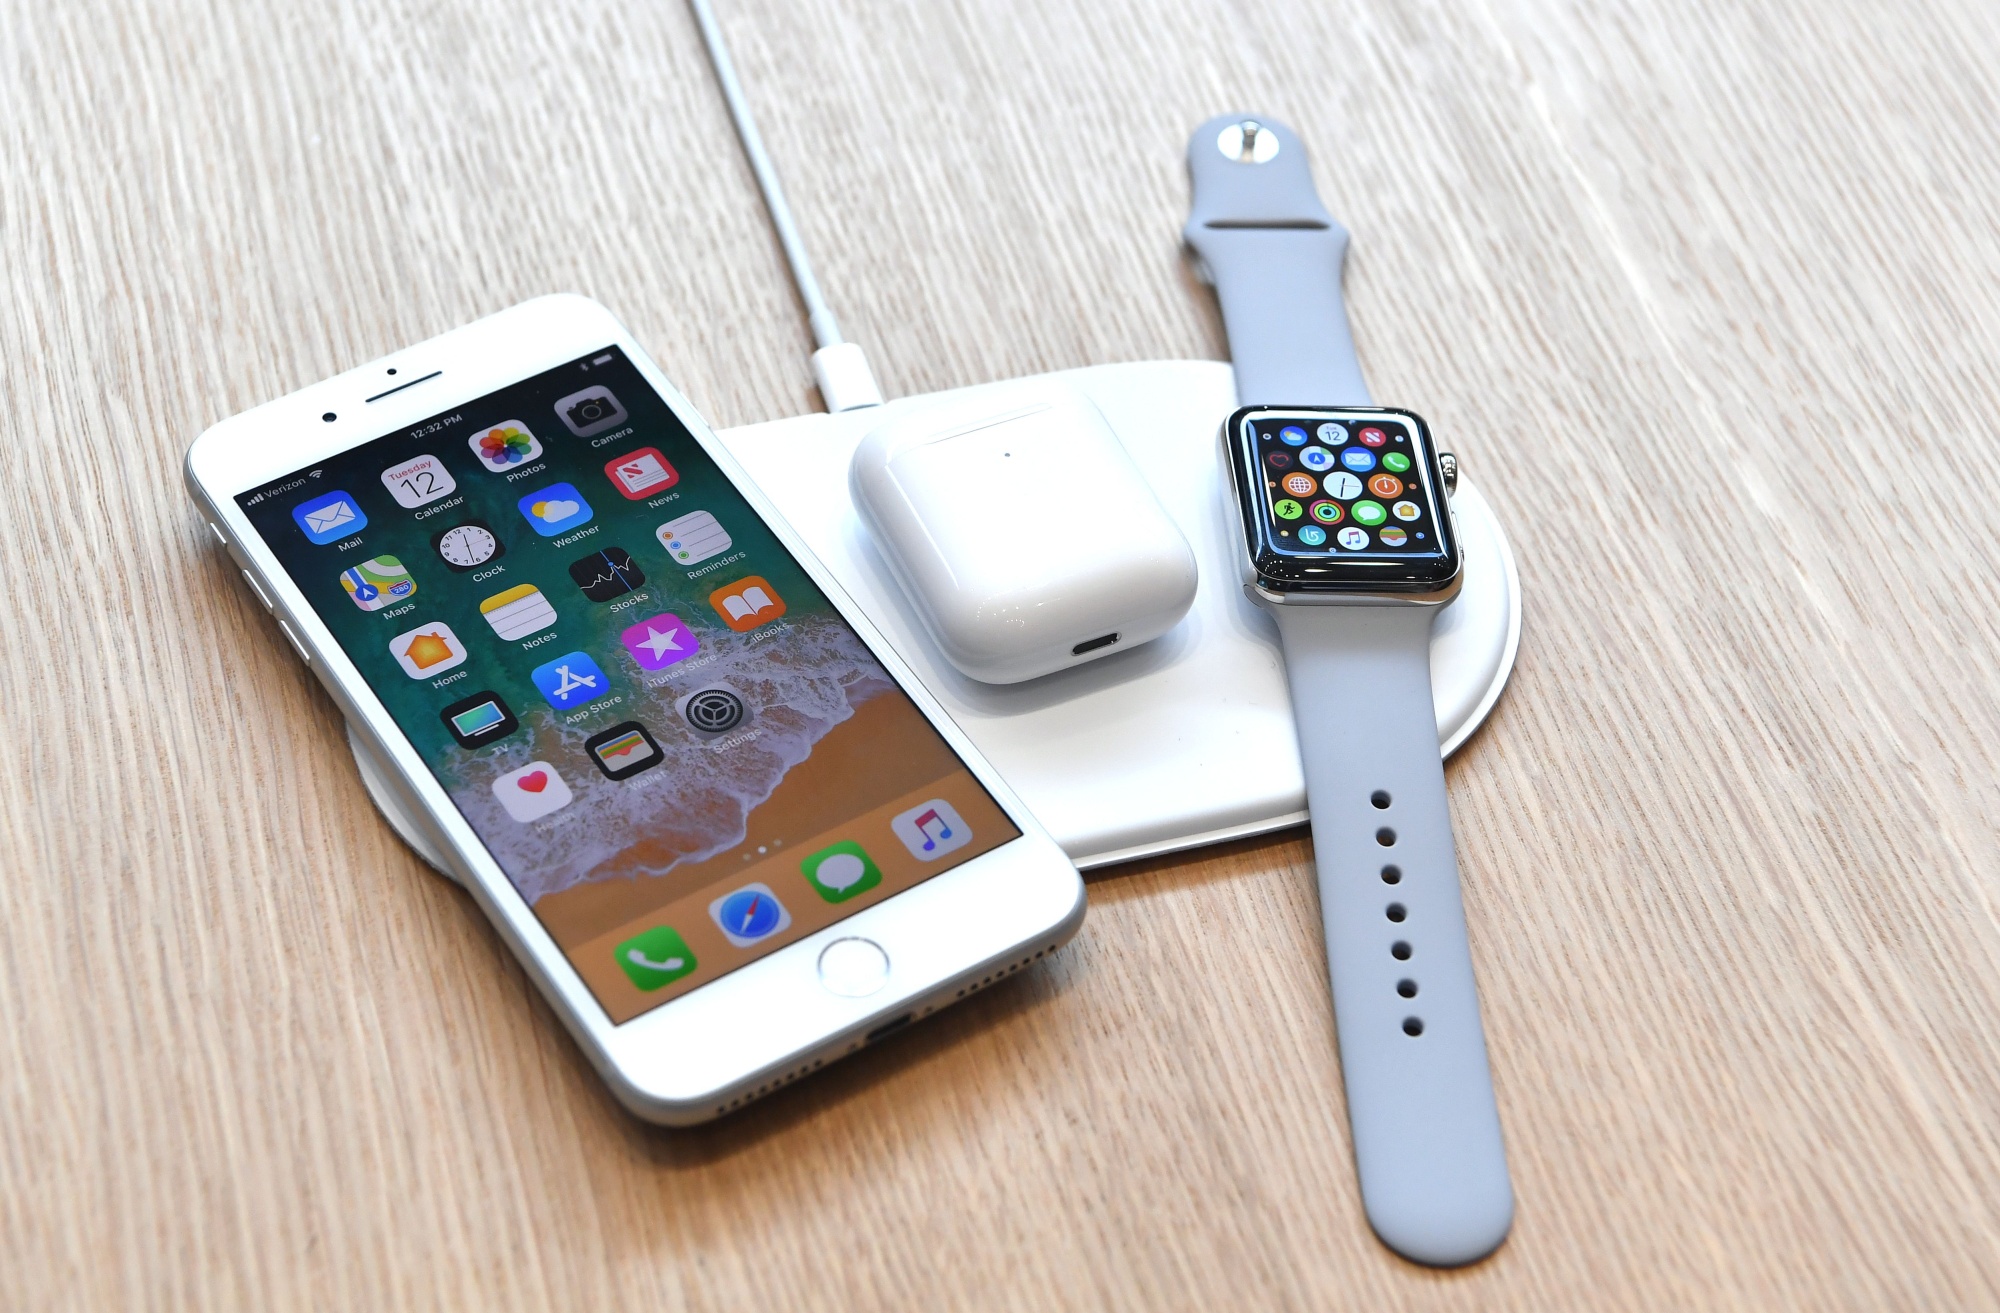 Startup Aira aims to replicate Apple's canceled wireless charger